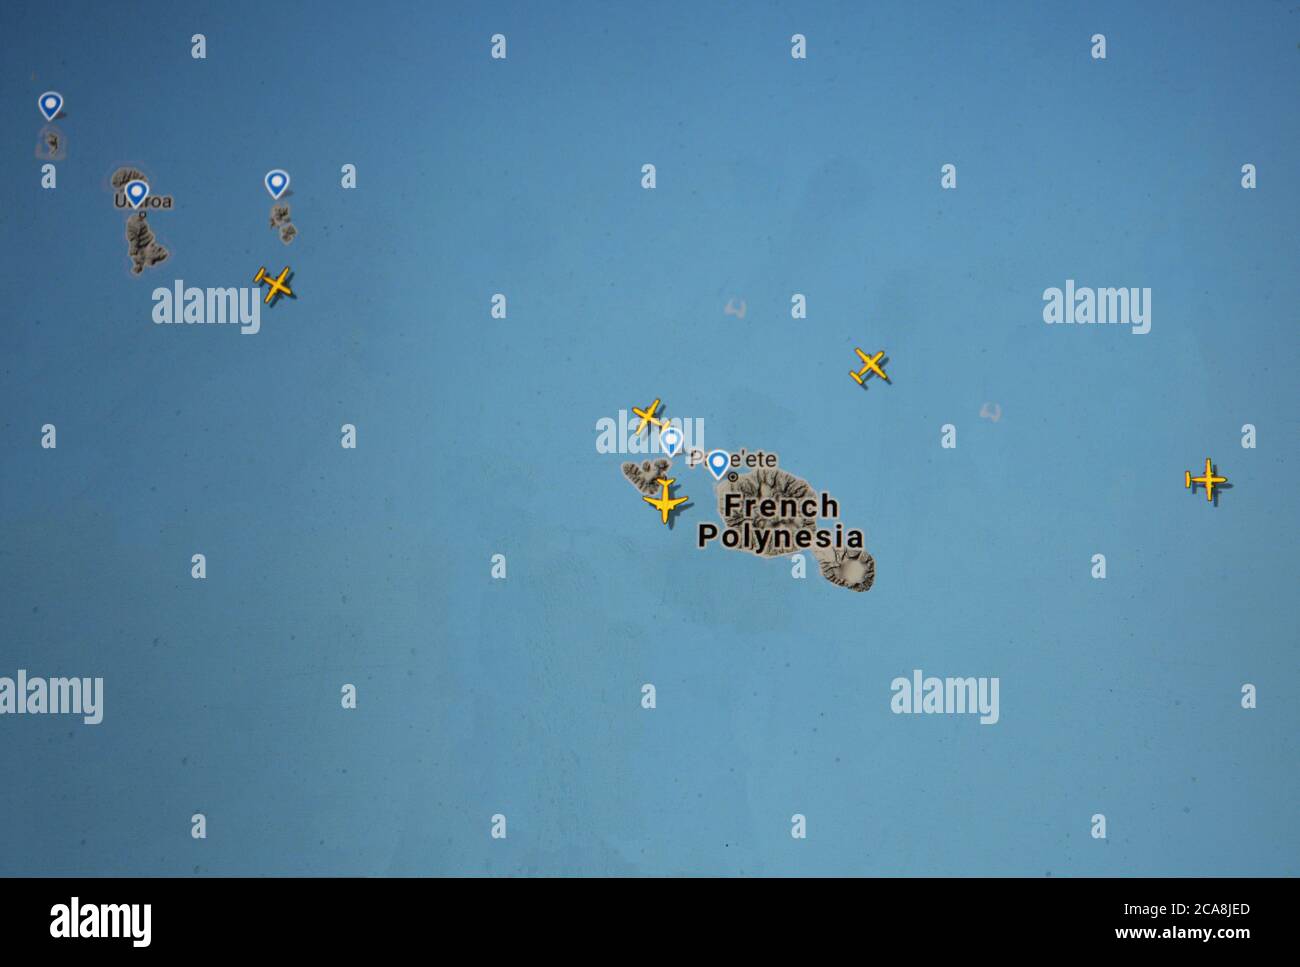 air flight over French Polynesia (05 august 2020, UTC 18.51),  on Internet with Flightradar 24 site, during the Coronavirus Pandemic period Stock Photo